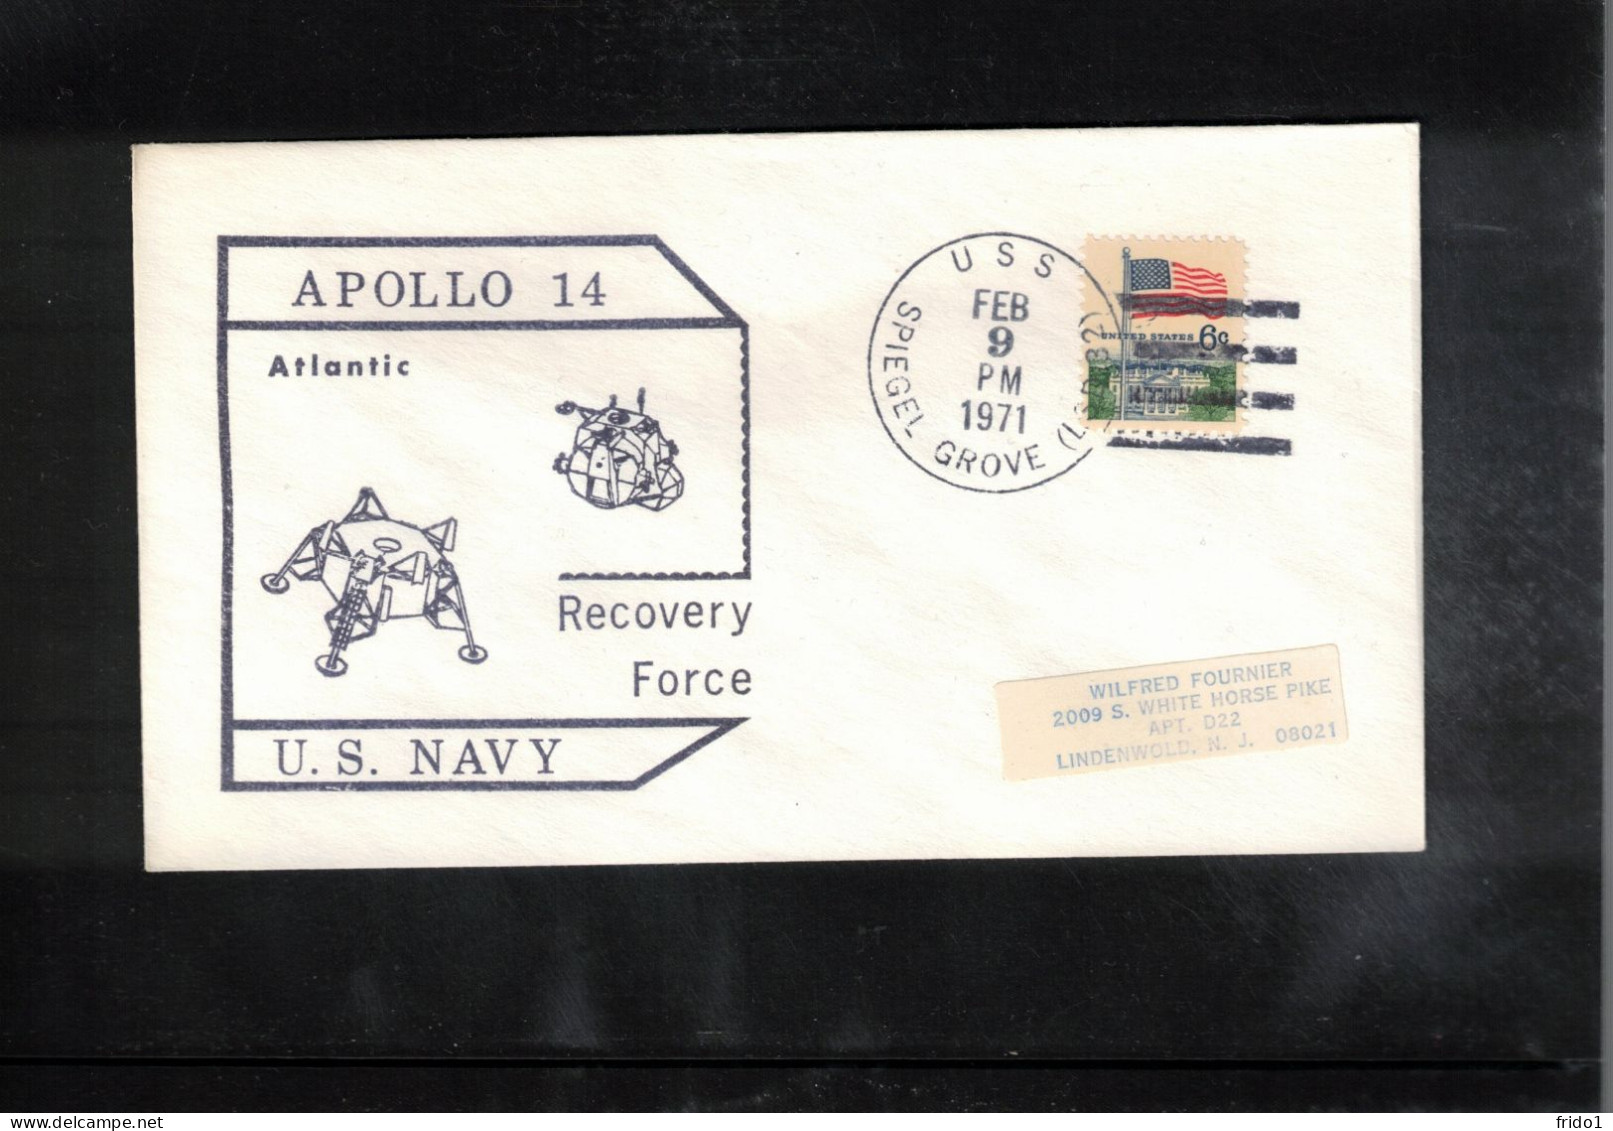 USA 1971 Space / Weltraum - Apollo 14 - US Navy Recovery Force Atlantic USS SPIEGEL Interesting Cover - United States